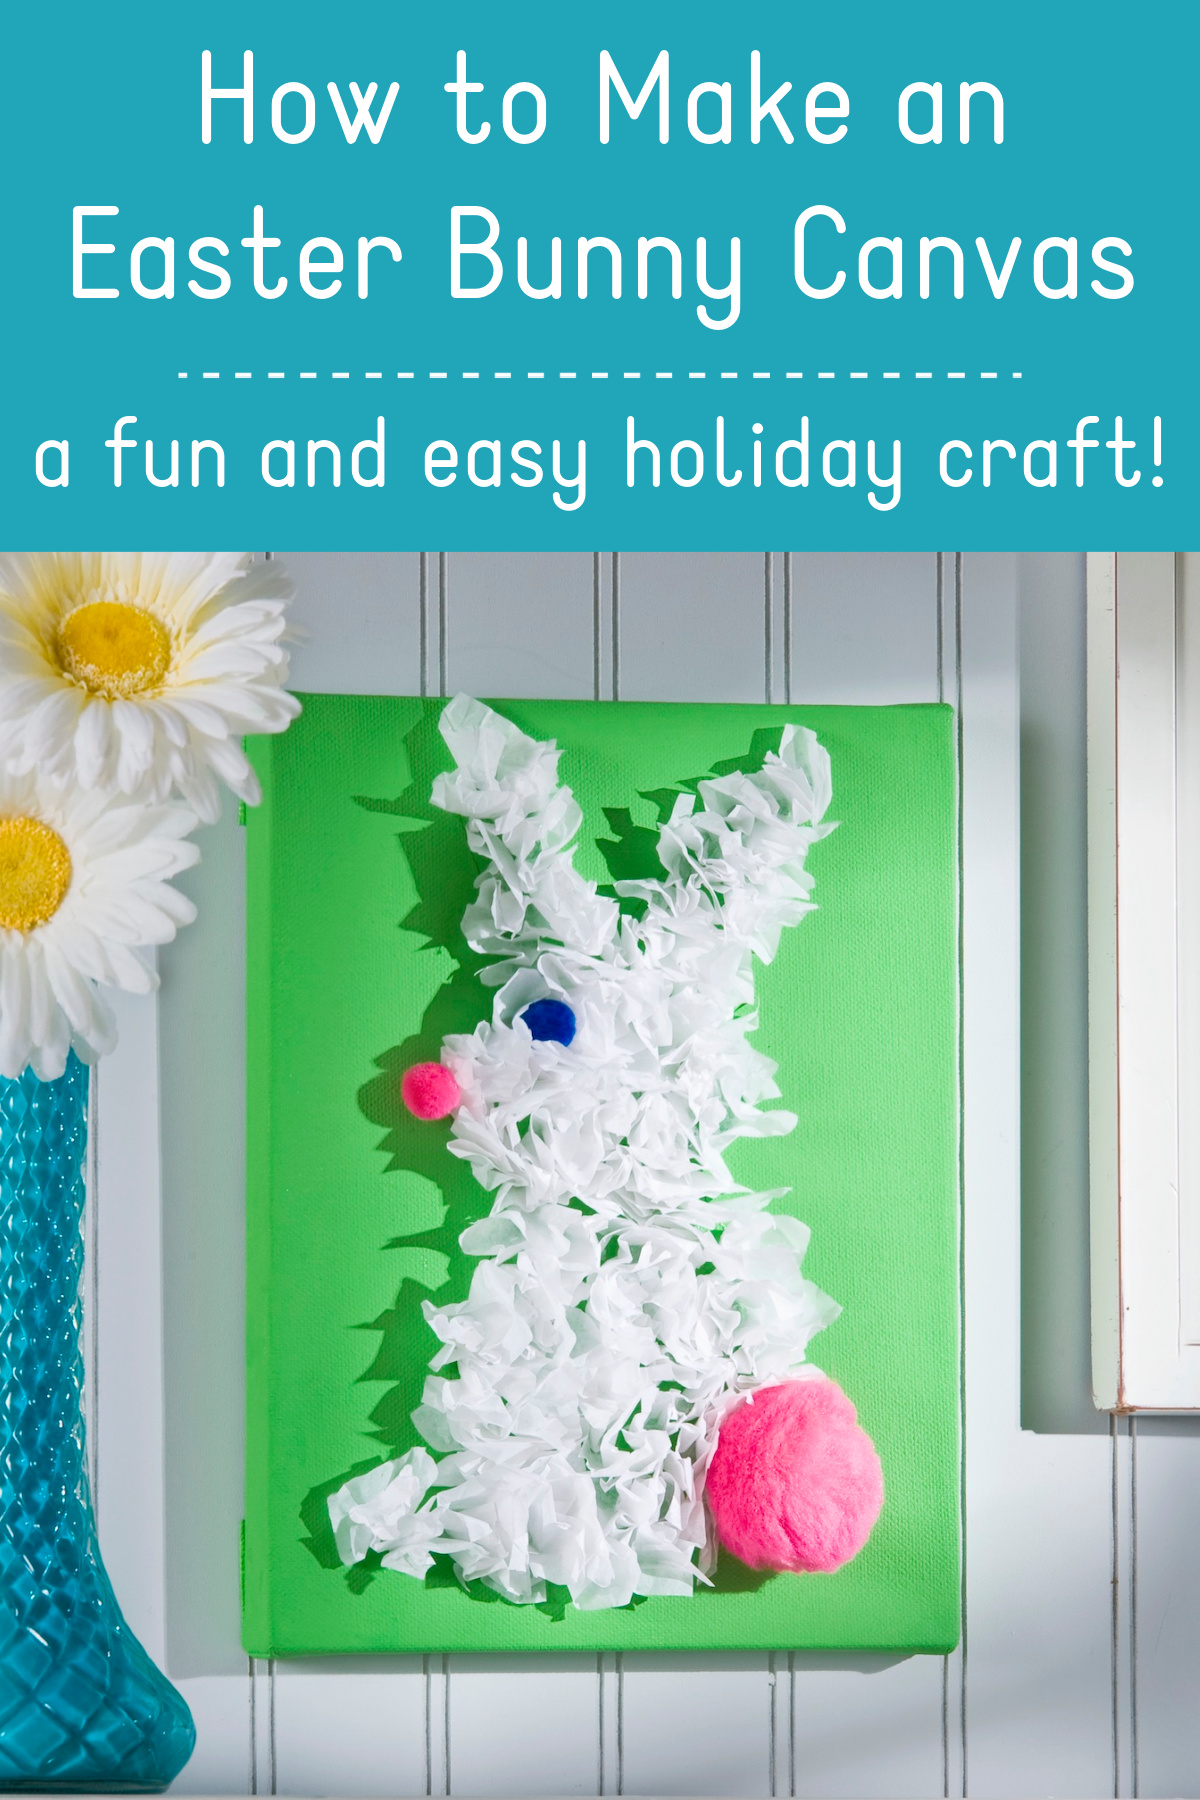 How to make an Easter bunny canvas